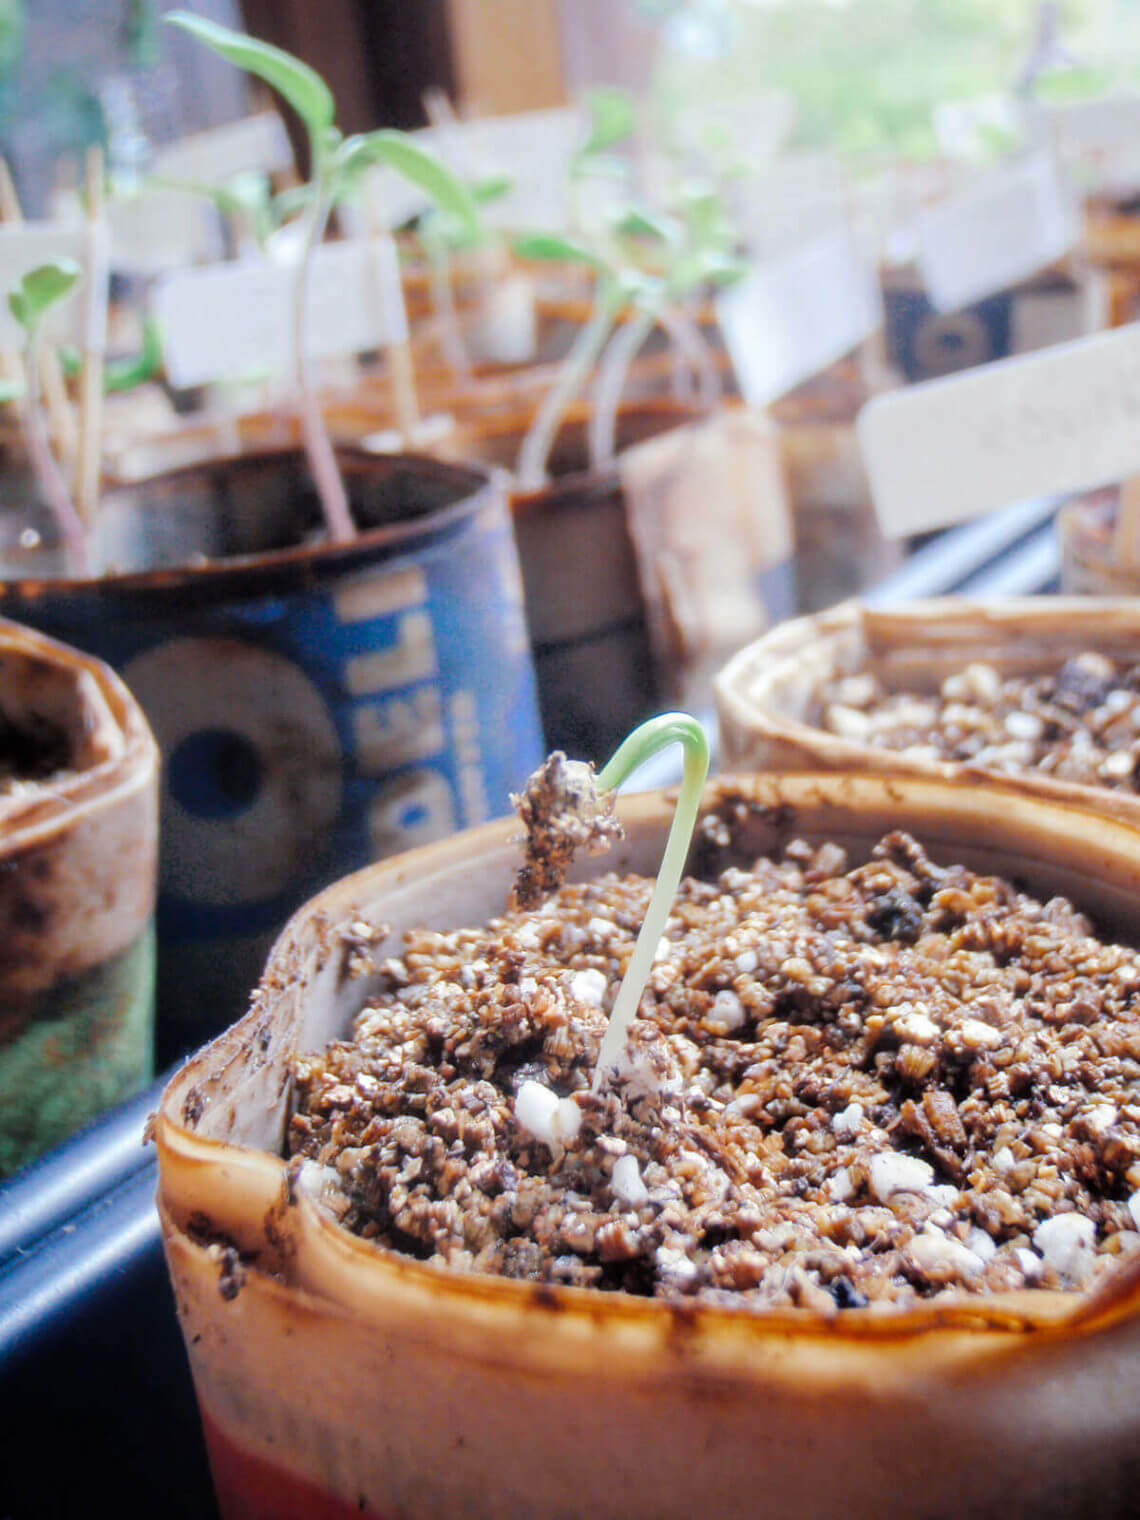 Seed starting containers you already have around the house